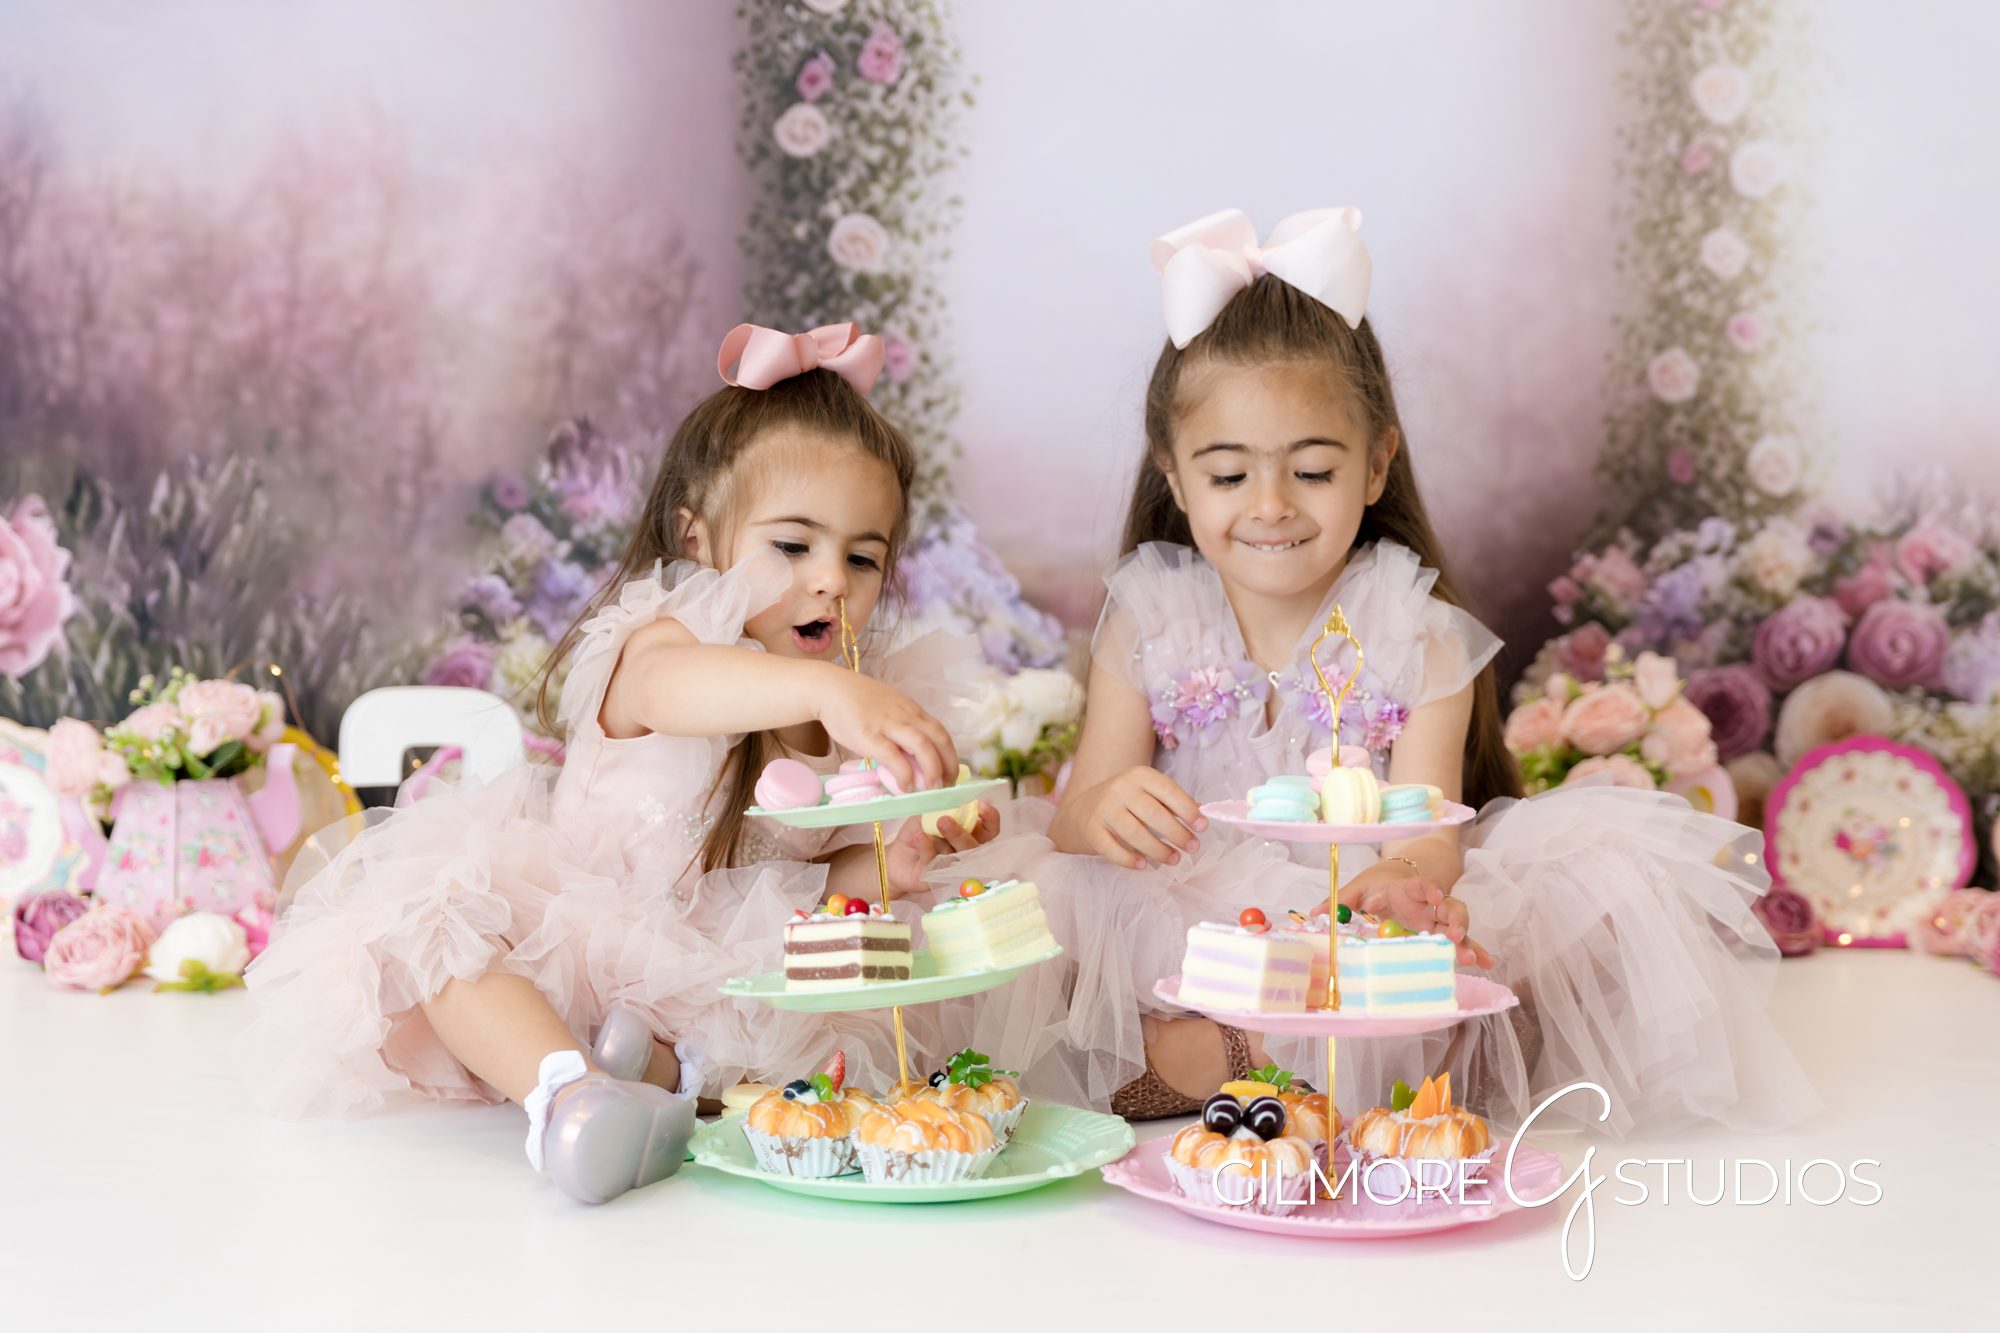 tea party cake smash, pink bows, little girls, big sister, little sister, tea party, eating cake, holding sweets, smiling, indoor photography, cake smash, gilmore studios